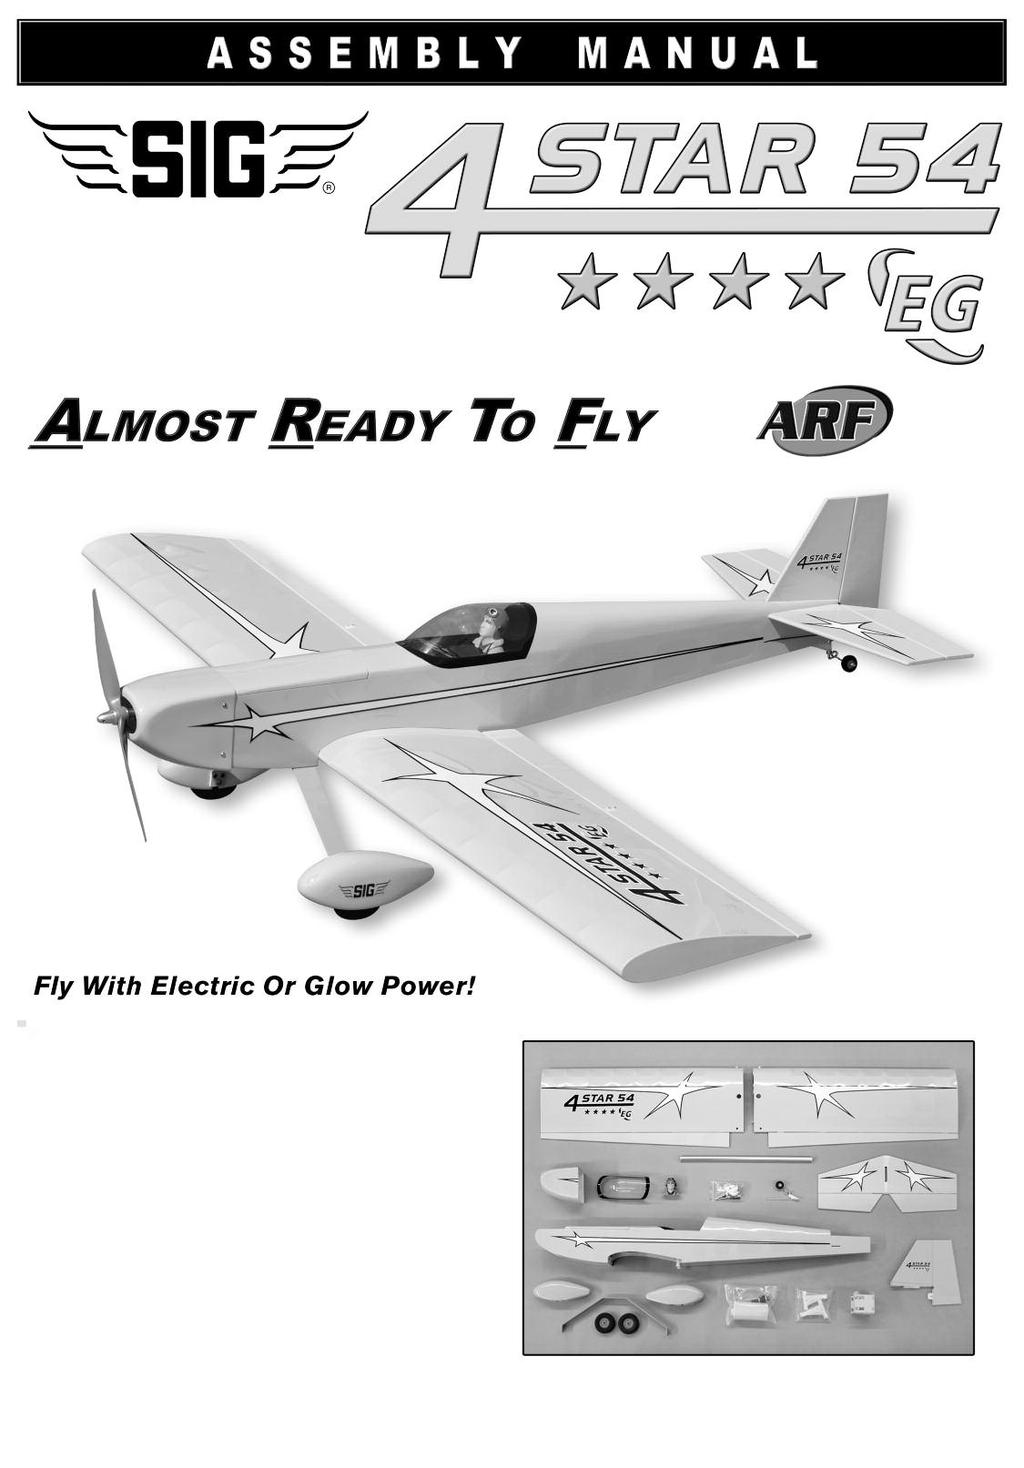 KIT NO.: SIGRC44EGARFR - (red) SIGRC44EGARFY - (yellow) SPECIFICATIONS: Wing Span: 54 in. (1372 mm) Wing Area: 585 sq.in. (37.7 dm 2 ) Length: 47.5 in. (1206 mm) Flying Weight: 5-5.5 lbs.